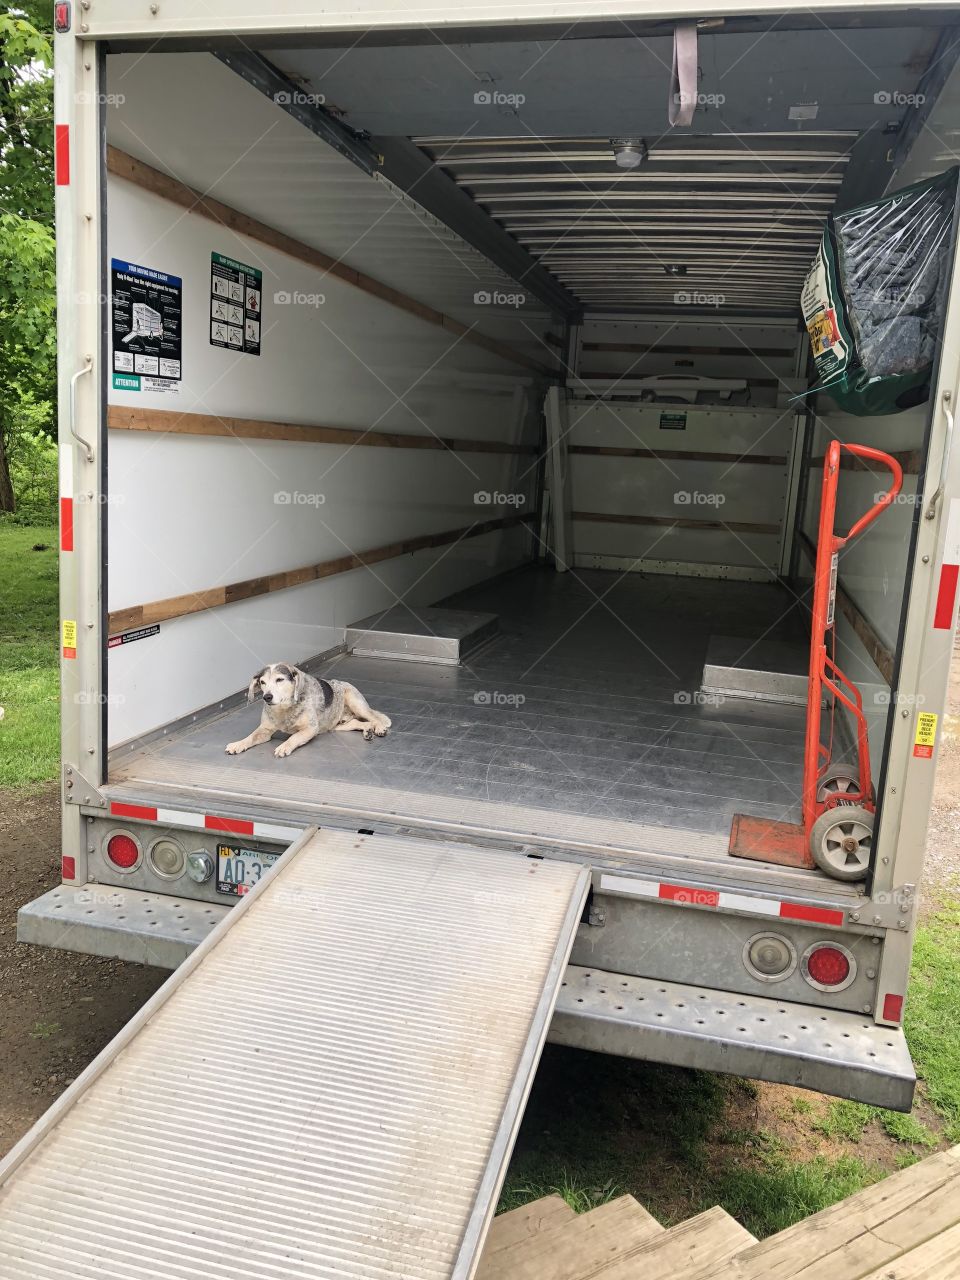 Moving day